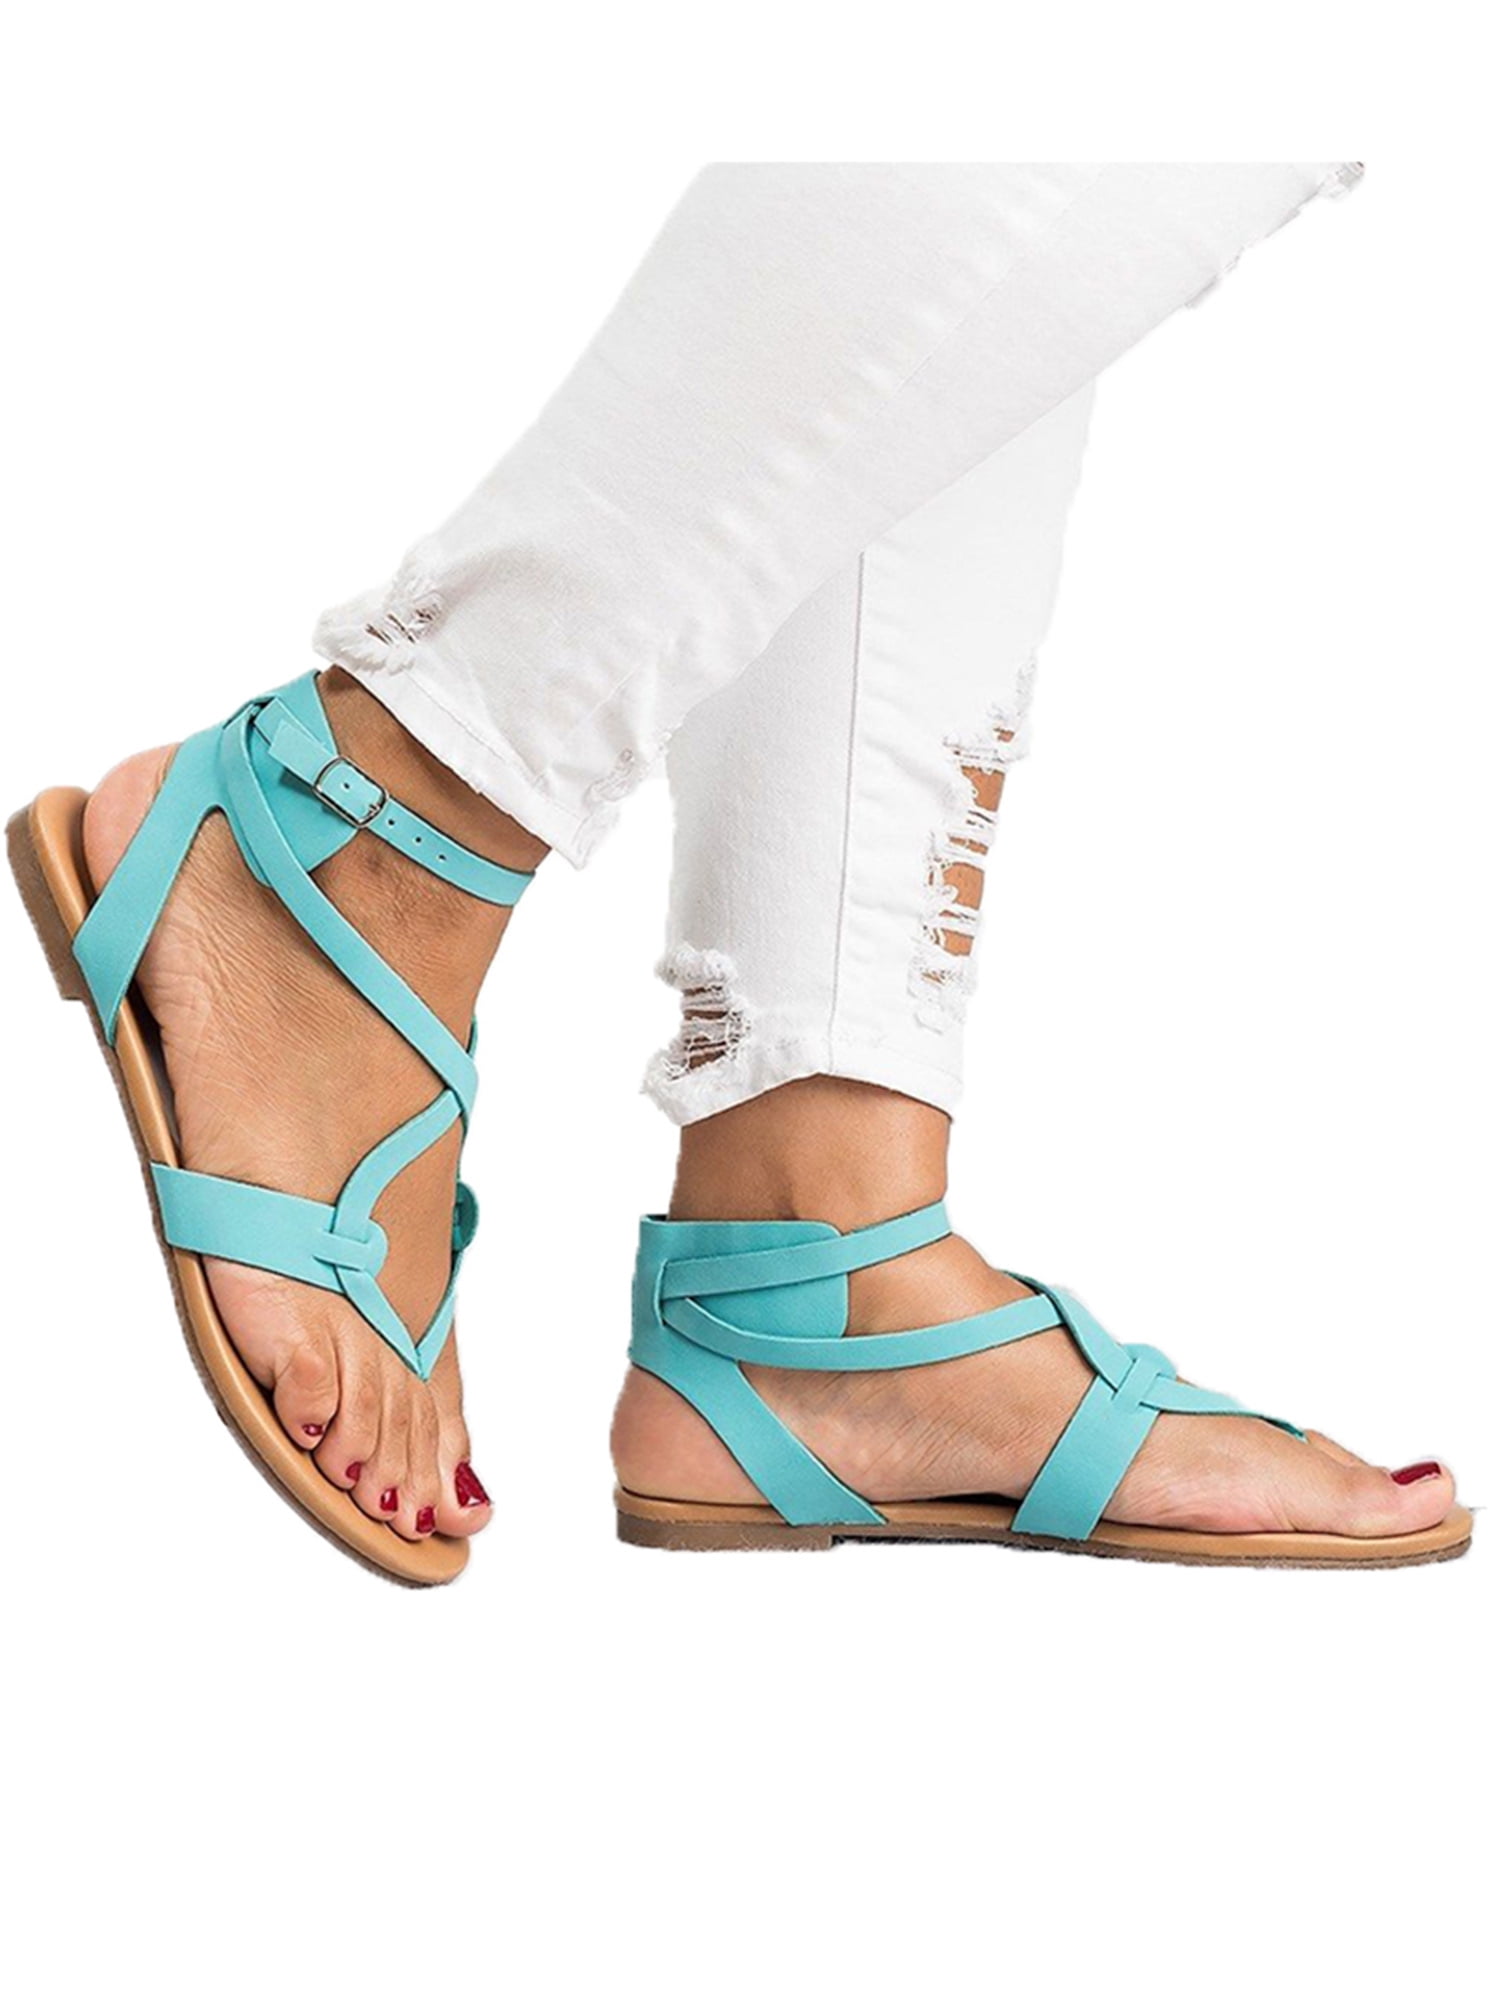 Ladies Womens Casual Flat Heel Ankle Strap Summer Gladiator Sandals Shoes Size 